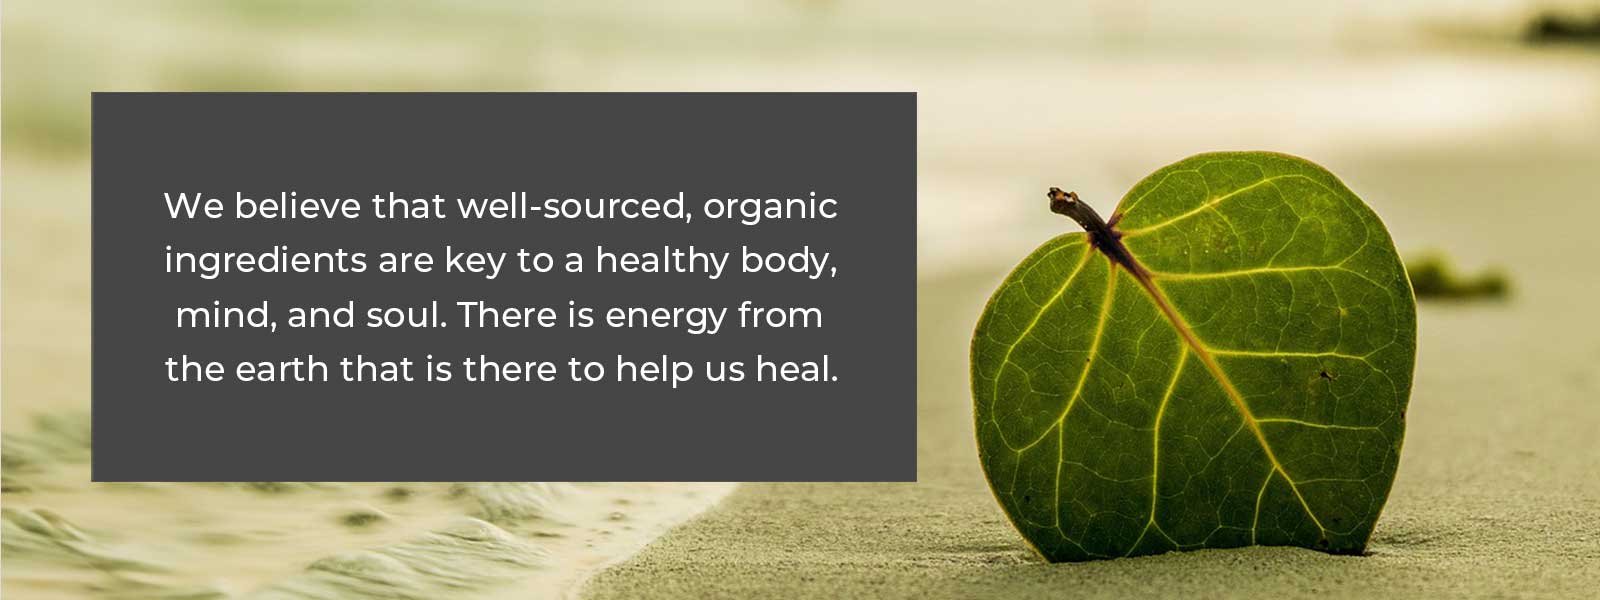 we believe organic ingredients are key to a healthy body mind and soul